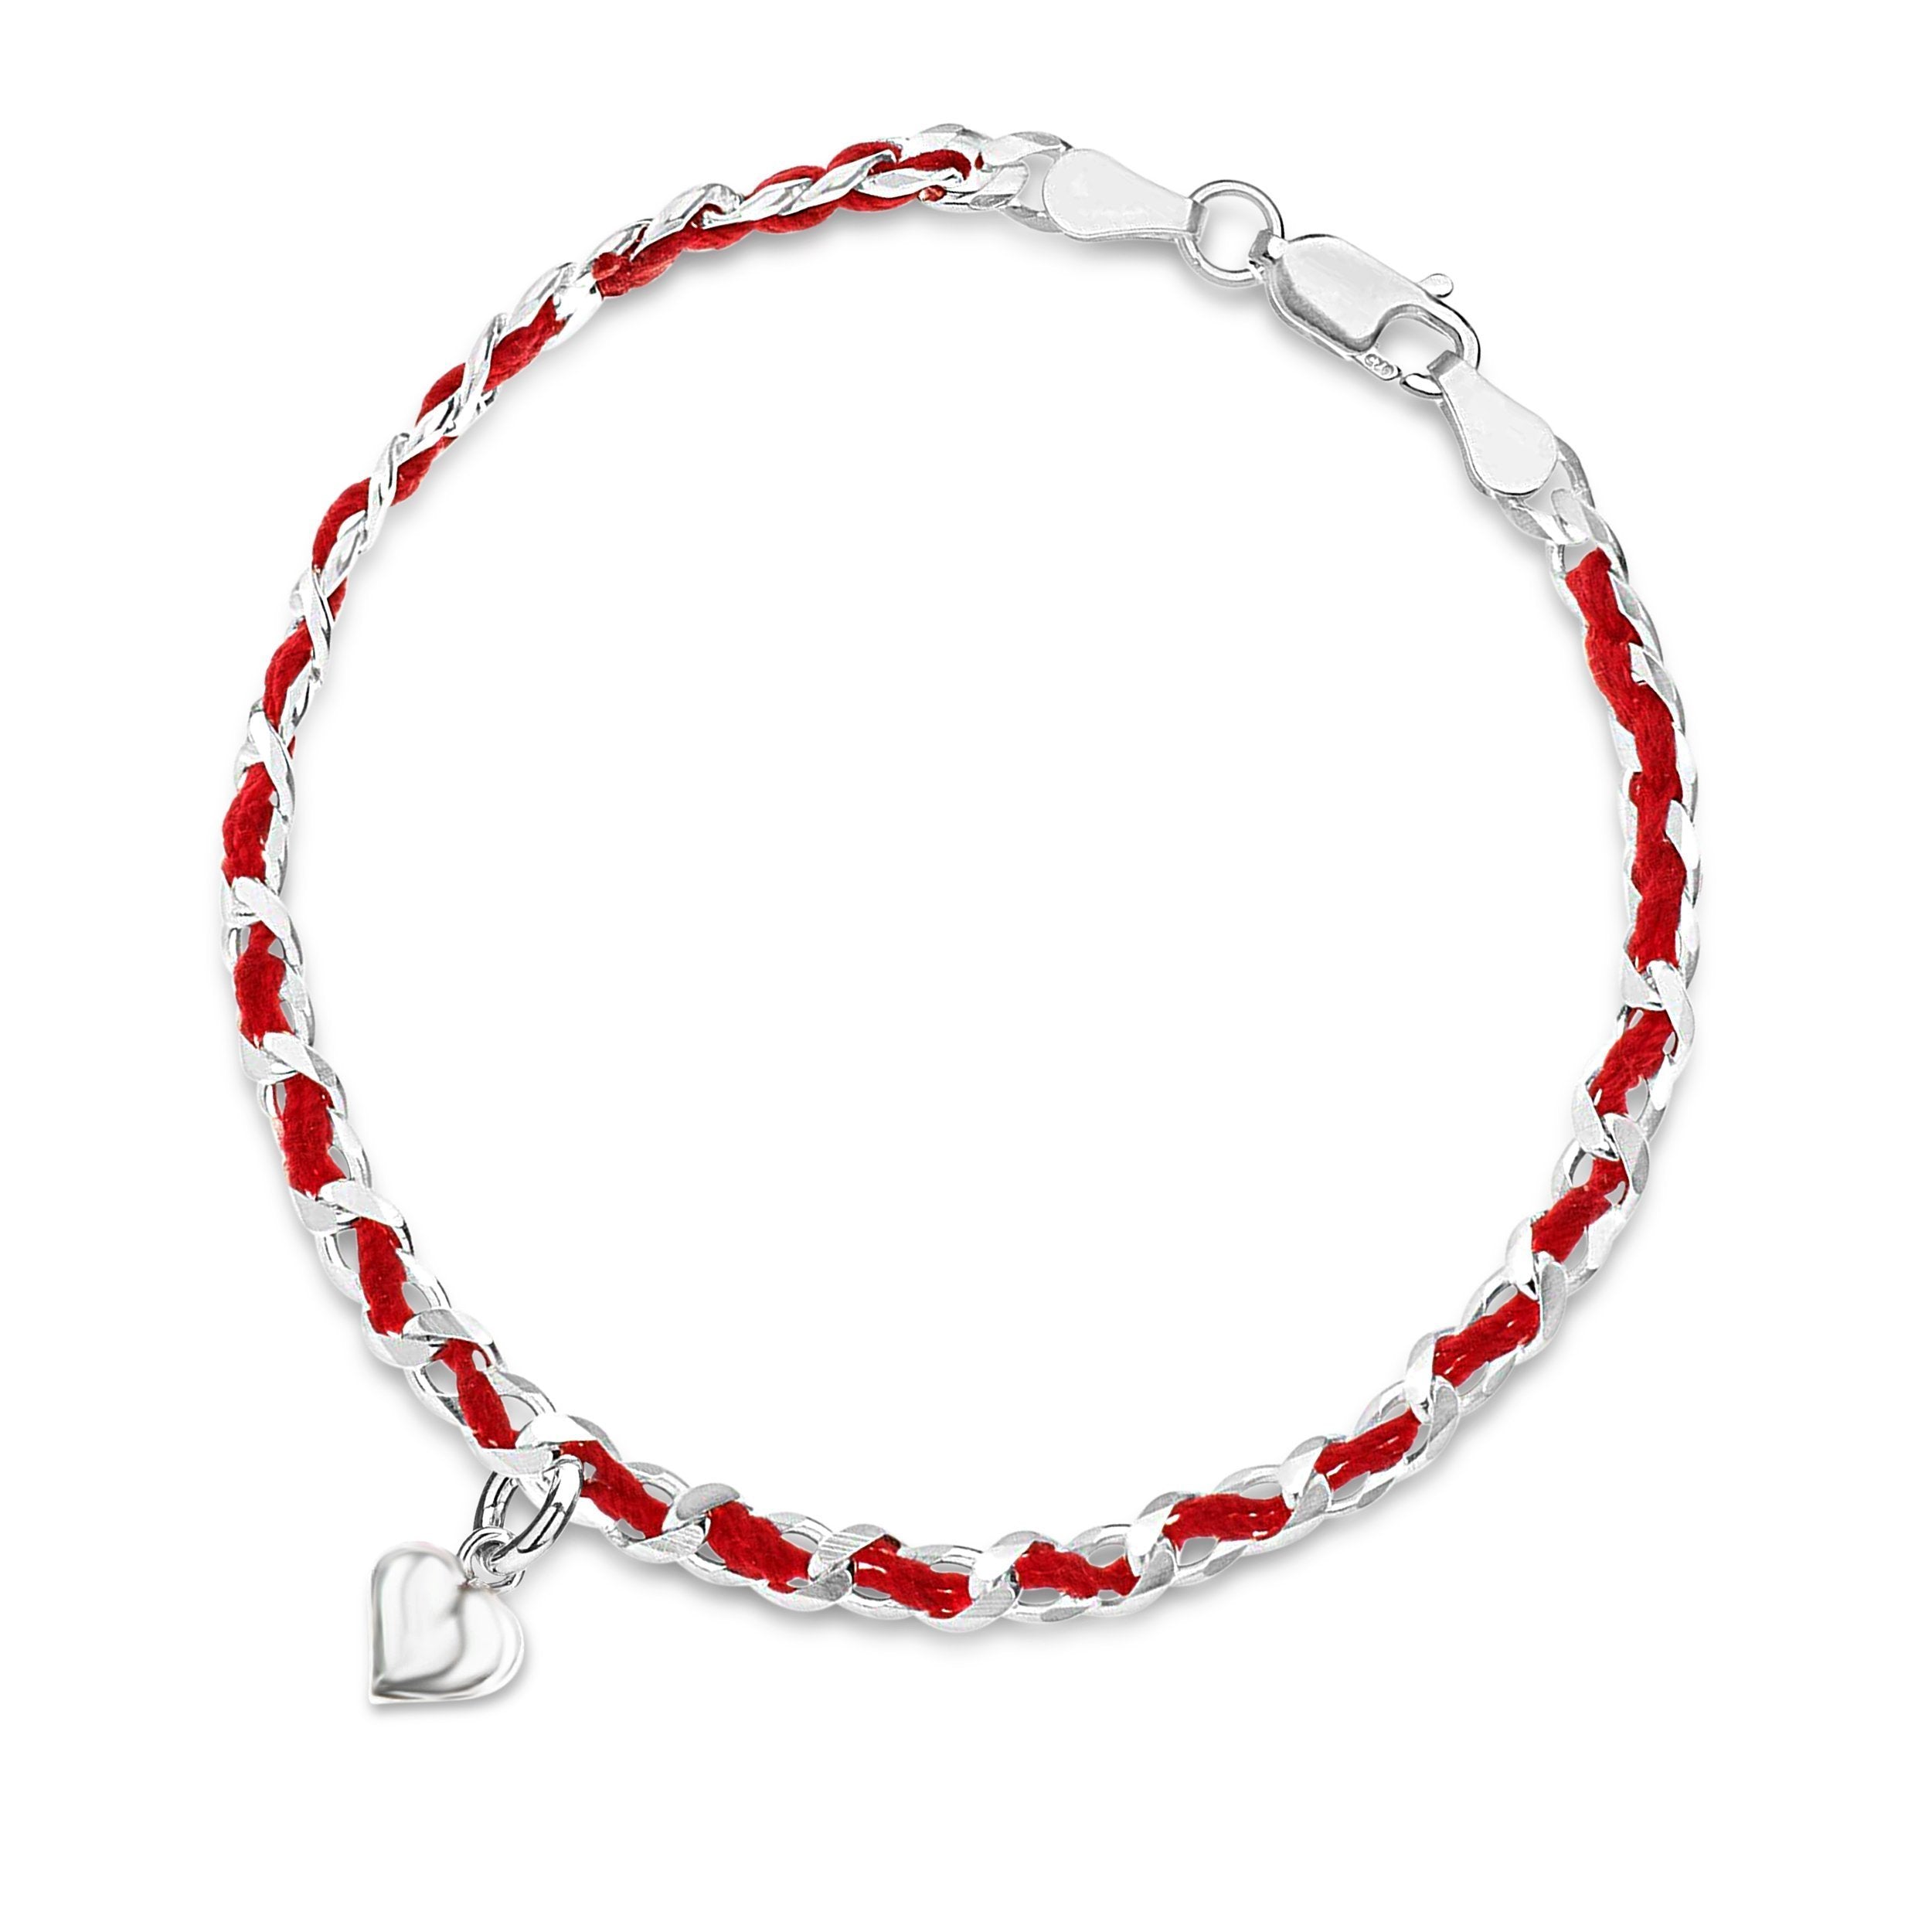 Scosha | Everyday Love Bracelet in Silver and Red